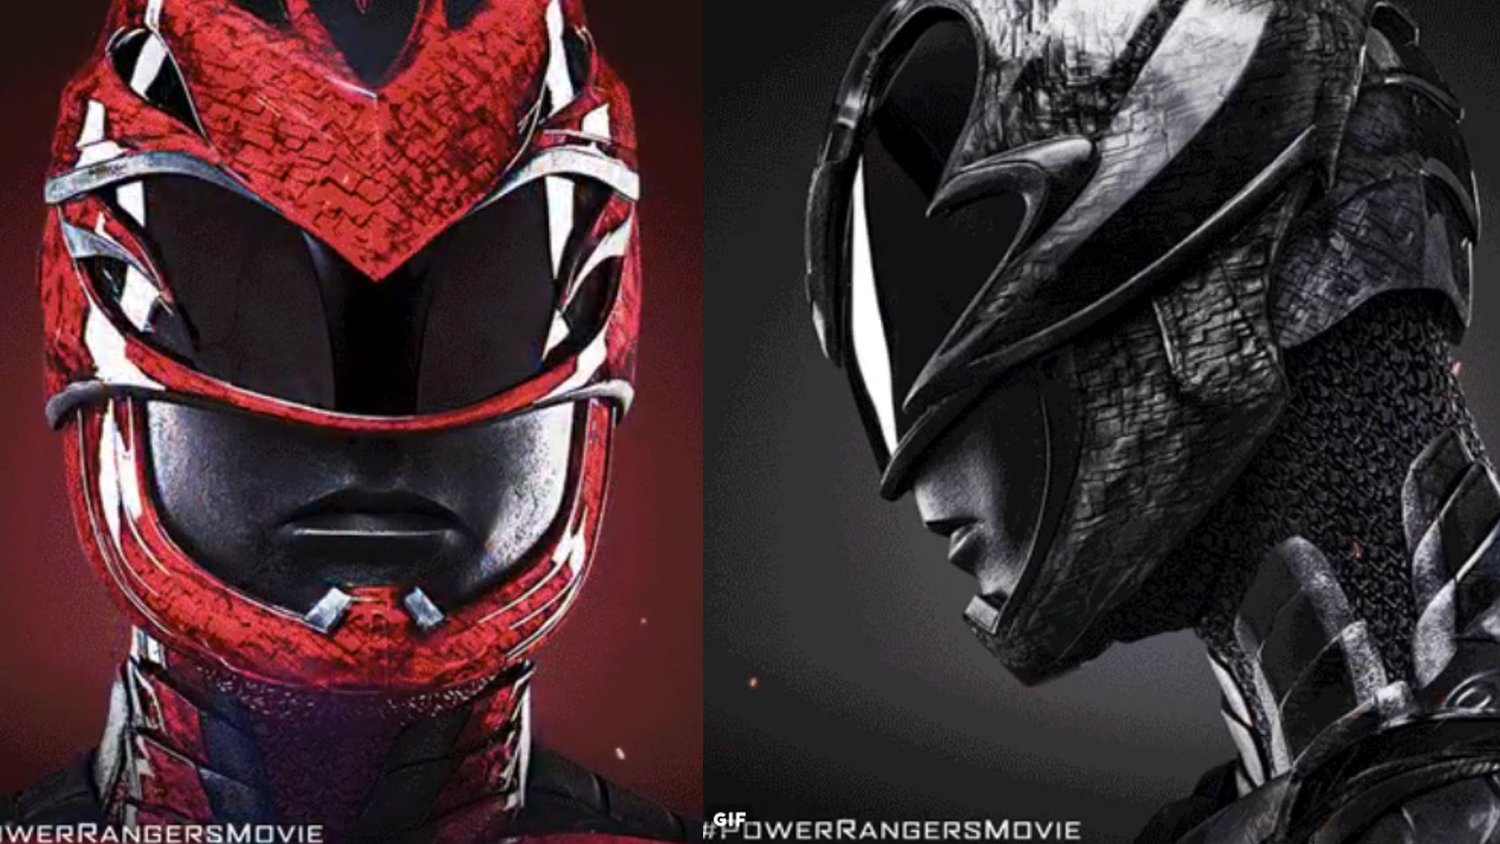 New POWER RANGERS Motion Poster Gives Us a Helmet Close-Up of The Character...